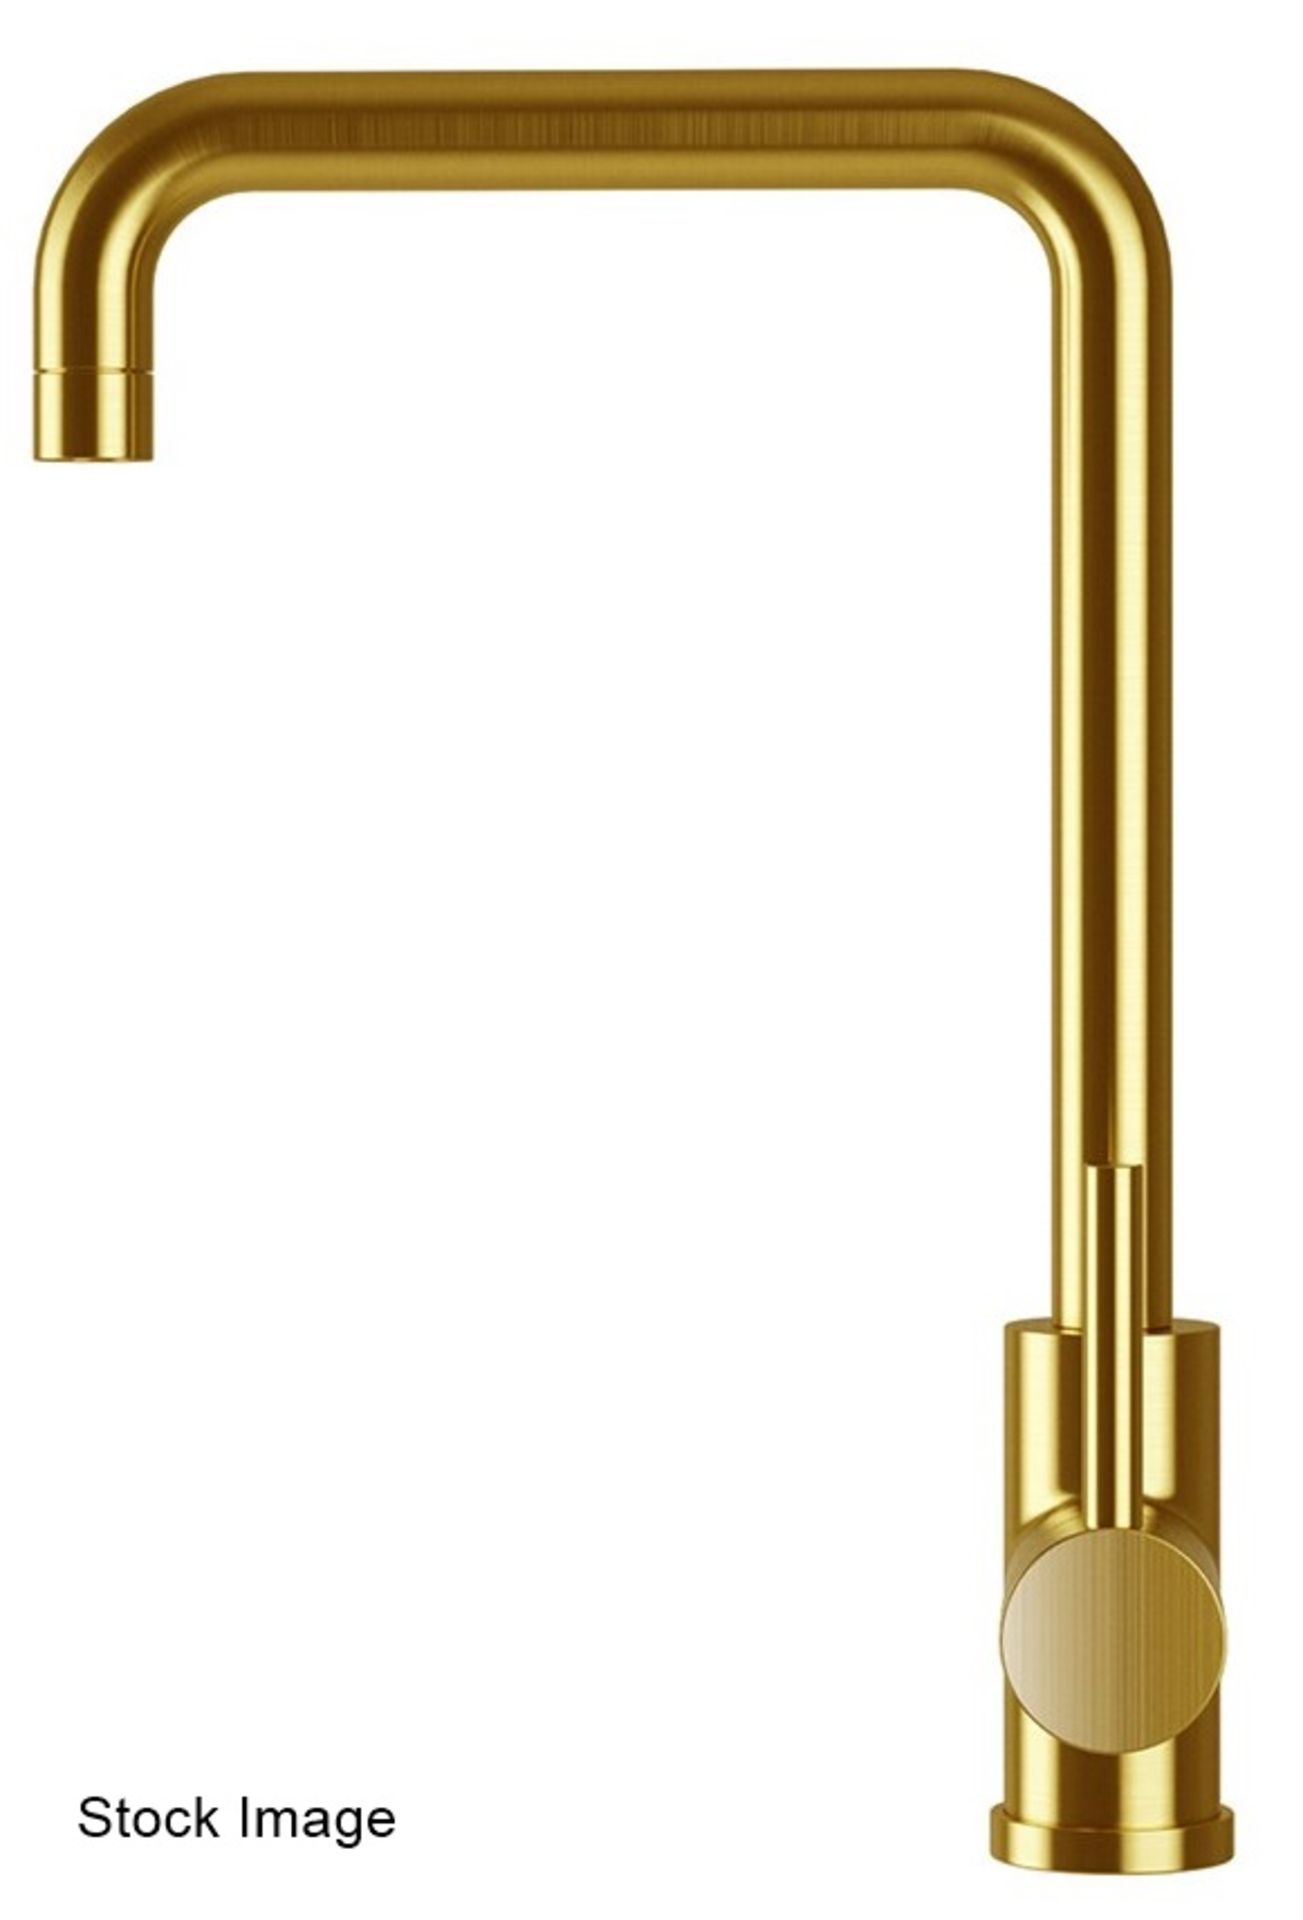 1 x CASSELLIE Brushed Gold Single Lever Mono Kitchen Sink Mixer Tap - Ref: KTA035 - New & Boxed - Image 3 of 3